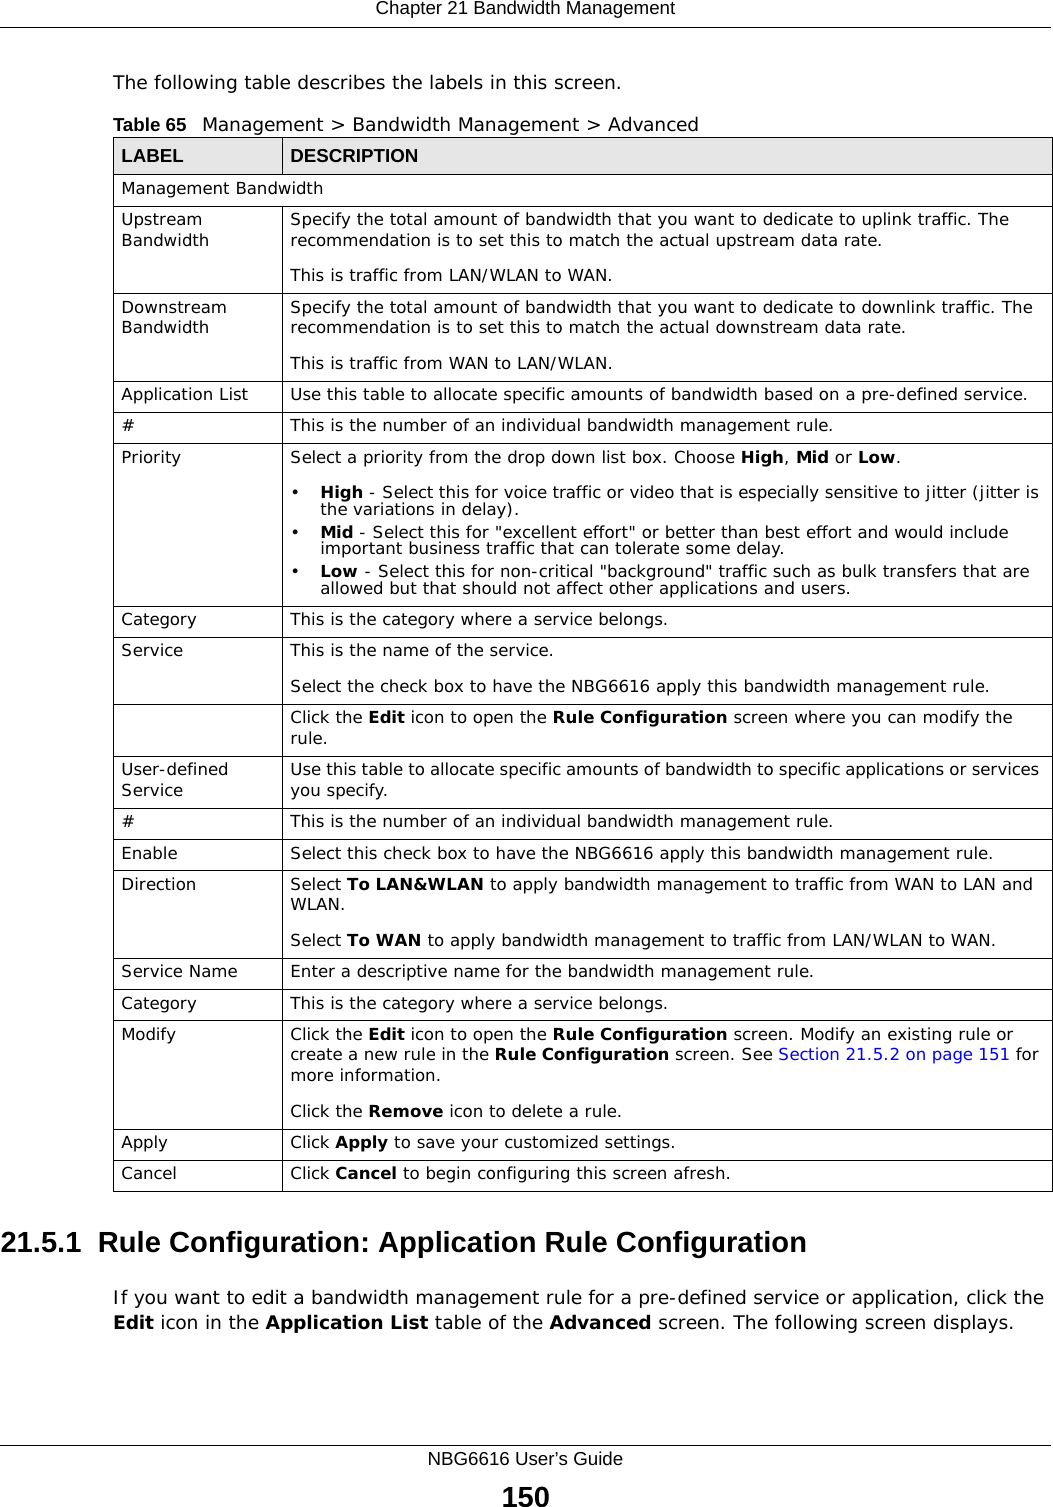 Chapter 21 Bandwidth ManagementNBG6616 User’s Guide150The following table describes the labels in this screen.21.5.1  Rule Configuration: Application Rule Configuration    If you want to edit a bandwidth management rule for a pre-defined service or application, click the Edit icon in the Application List table of the Advanced screen. The following screen displays.Table 65   Management &gt; Bandwidth Management &gt; Advanced LABEL DESCRIPTIONManagement BandwidthUpstream Bandwidth Specify the total amount of bandwidth that you want to dedicate to uplink traffic. The recommendation is to set this to match the actual upstream data rate.This is traffic from LAN/WLAN to WAN.Downstream Bandwidth Specify the total amount of bandwidth that you want to dedicate to downlink traffic. The recommendation is to set this to match the actual downstream data rate.This is traffic from WAN to LAN/WLAN.Application List Use this table to allocate specific amounts of bandwidth based on a pre-defined service.#This is the number of an individual bandwidth management rule.Priority Select a priority from the drop down list box. Choose High, Mid or Low.•High - Select this for voice traffic or video that is especially sensitive to jitter (jitter is the variations in delay).•Mid - Select this for &quot;excellent effort&quot; or better than best effort and would include important business traffic that can tolerate some delay.•Low - Select this for non-critical &quot;background&quot; traffic such as bulk transfers that are allowed but that should not affect other applications and users. Category This is the category where a service belongs.Service This is the name of the service.Select the check box to have the NBG6616 apply this bandwidth management rule. Click the Edit icon to open the Rule Configuration screen where you can modify the rule.User-defined Service  Use this table to allocate specific amounts of bandwidth to specific applications or services you specify.#This is the number of an individual bandwidth management rule.Enable Select this check box to have the NBG6616 apply this bandwidth management rule.Direction  Select To LAN&amp;WLAN to apply bandwidth management to traffic from WAN to LAN and WLAN. Select To WAN to apply bandwidth management to traffic from LAN/WLAN to WAN. Service Name Enter a descriptive name for the bandwidth management rule.Category This is the category where a service belongs.Modify Click the Edit icon to open the Rule Configuration screen. Modify an existing rule or create a new rule in the Rule Configuration screen. See Section 21.5.2 on page 151 for more information.Click the Remove icon to delete a rule.Apply Click Apply to save your customized settings.Cancel Click Cancel to begin configuring this screen afresh.